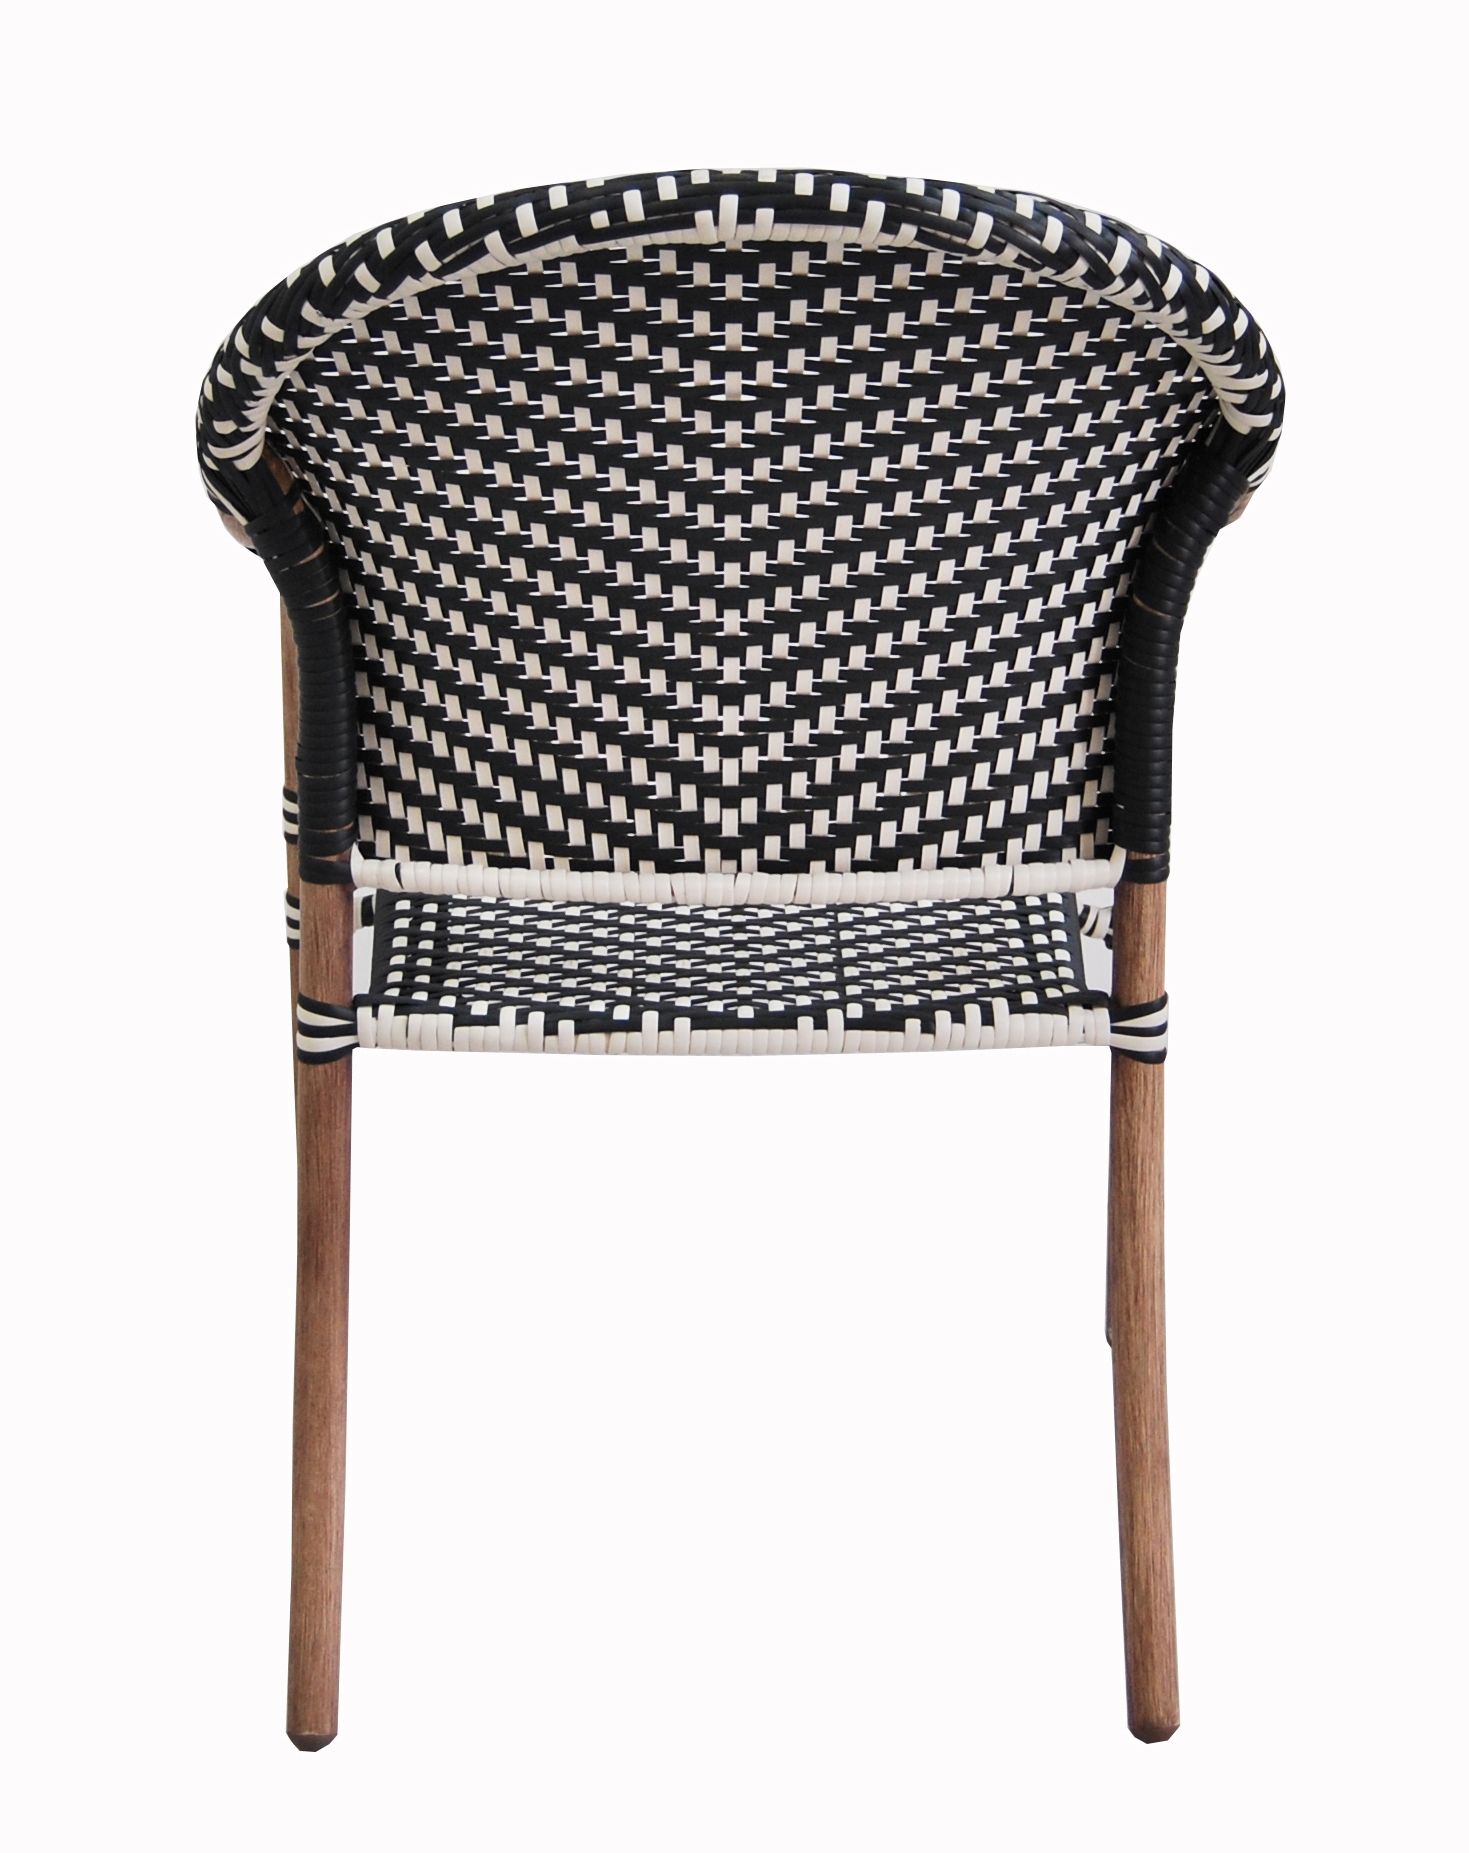 Better Homes & Gardens Parisian Bistro Dining Chair - image 3 of 6